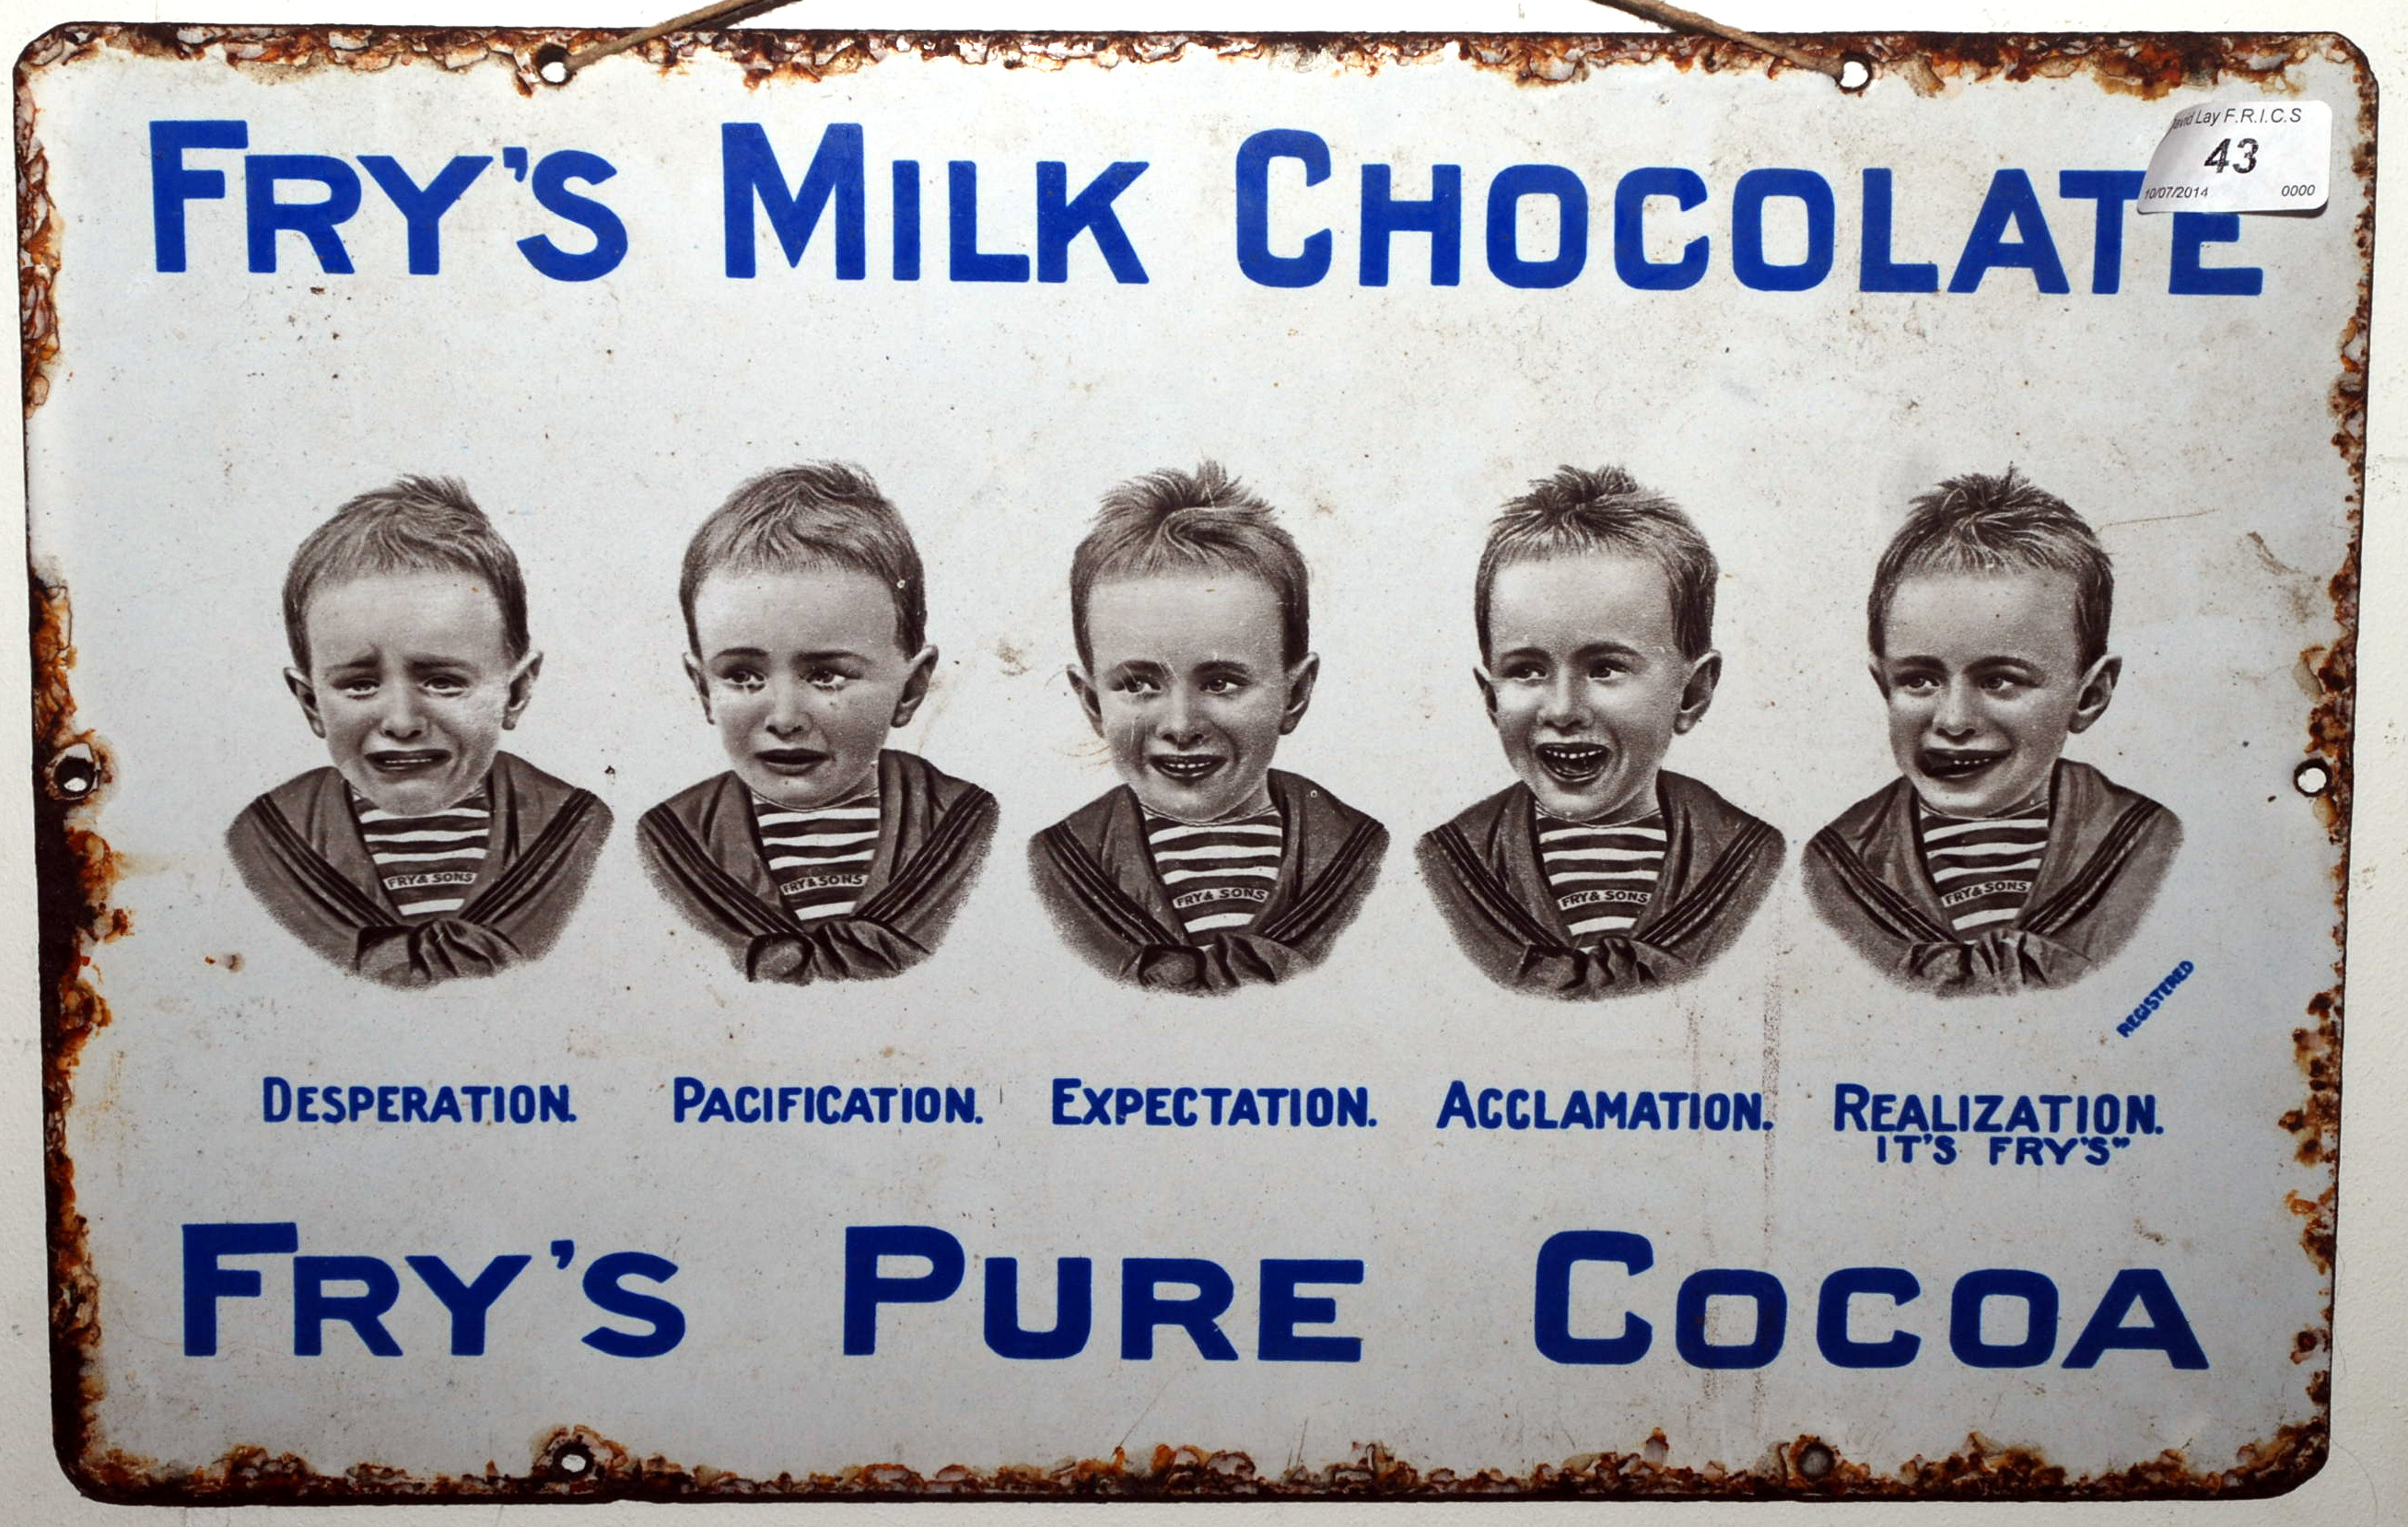 A rare Fry's Milk Chocolate enamelled advertising sign showing the famous five boys printed in